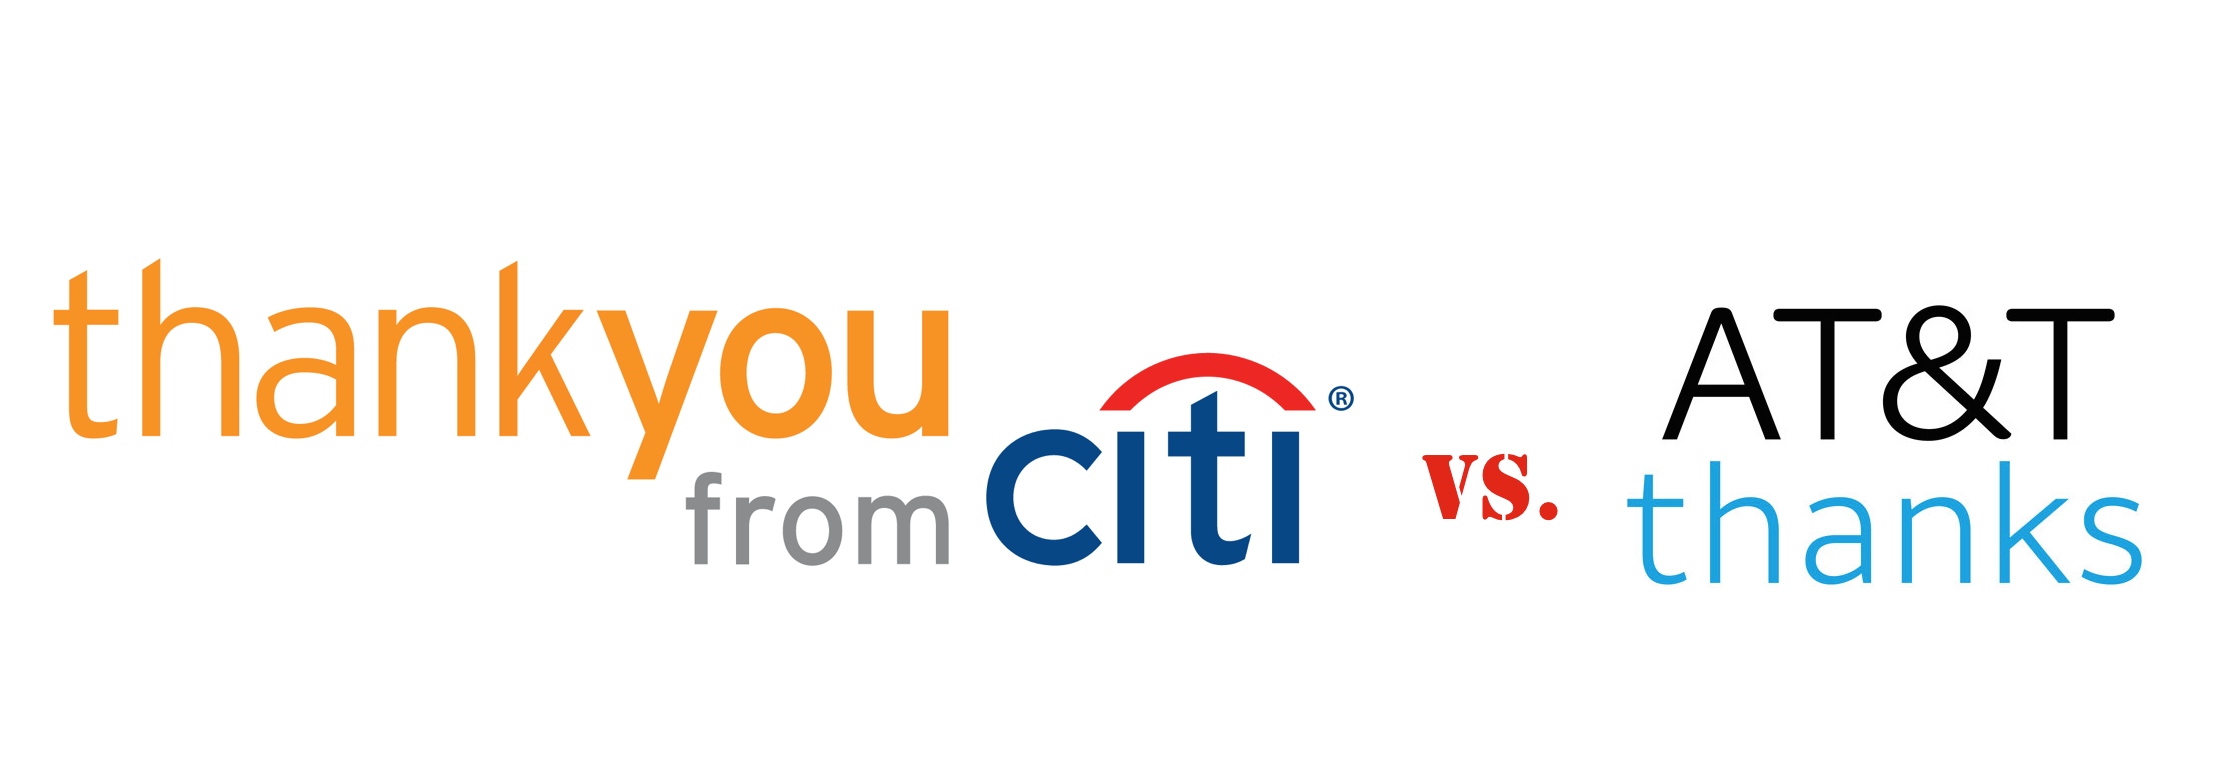 Citigroup And AT&T End Legal Feud Over Concept Of Thankfulness